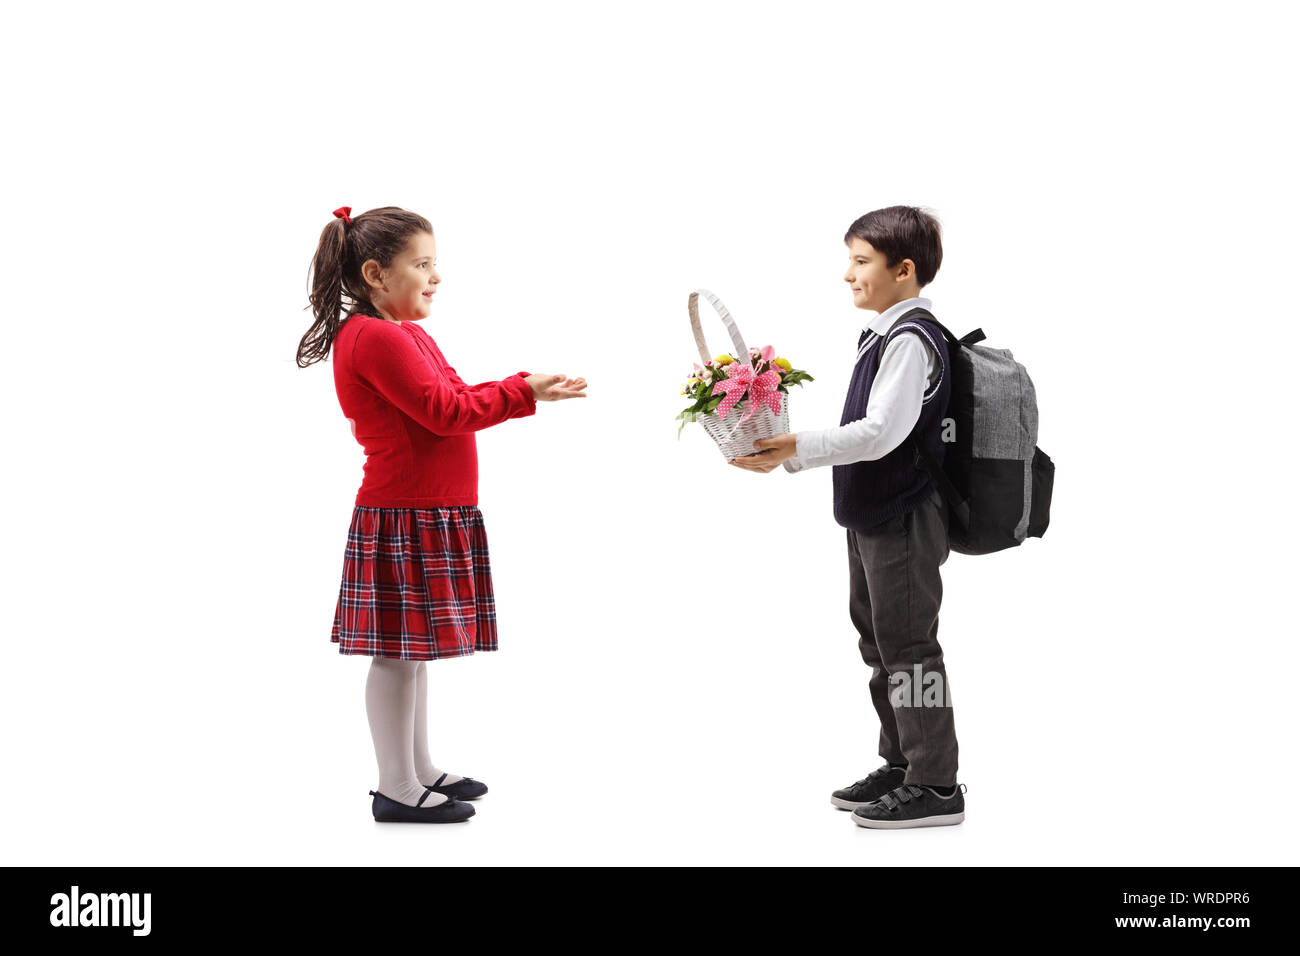 Full length profile shot of a schoolboy giving a basket with flowers to a little girl isolated on white background Stock Photo